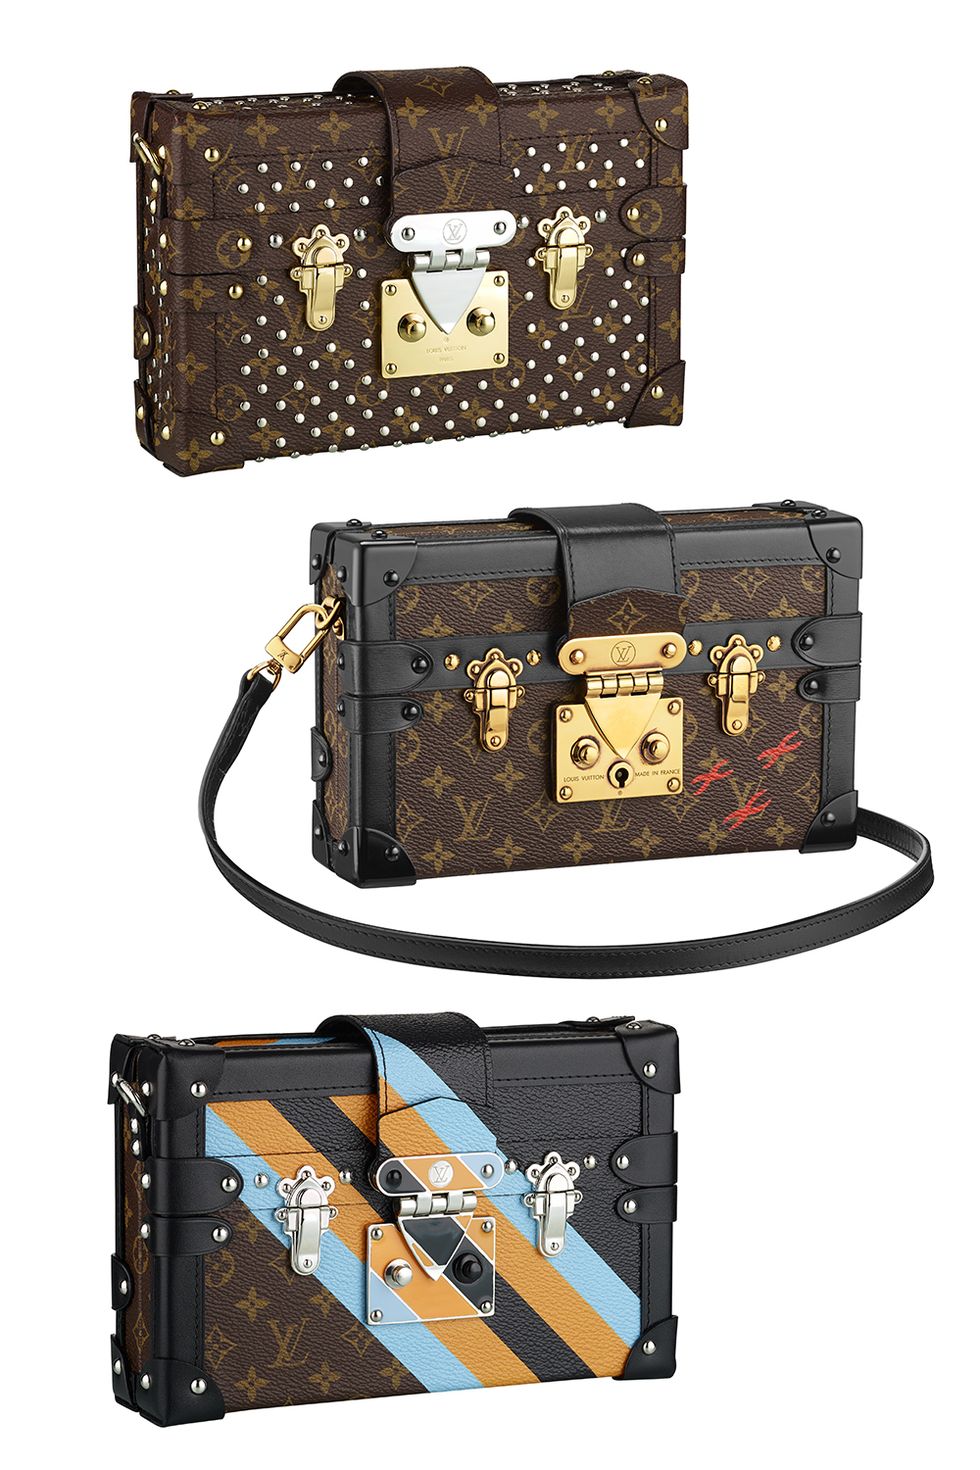 Cute Handbags for Women: Petite Malle Collection